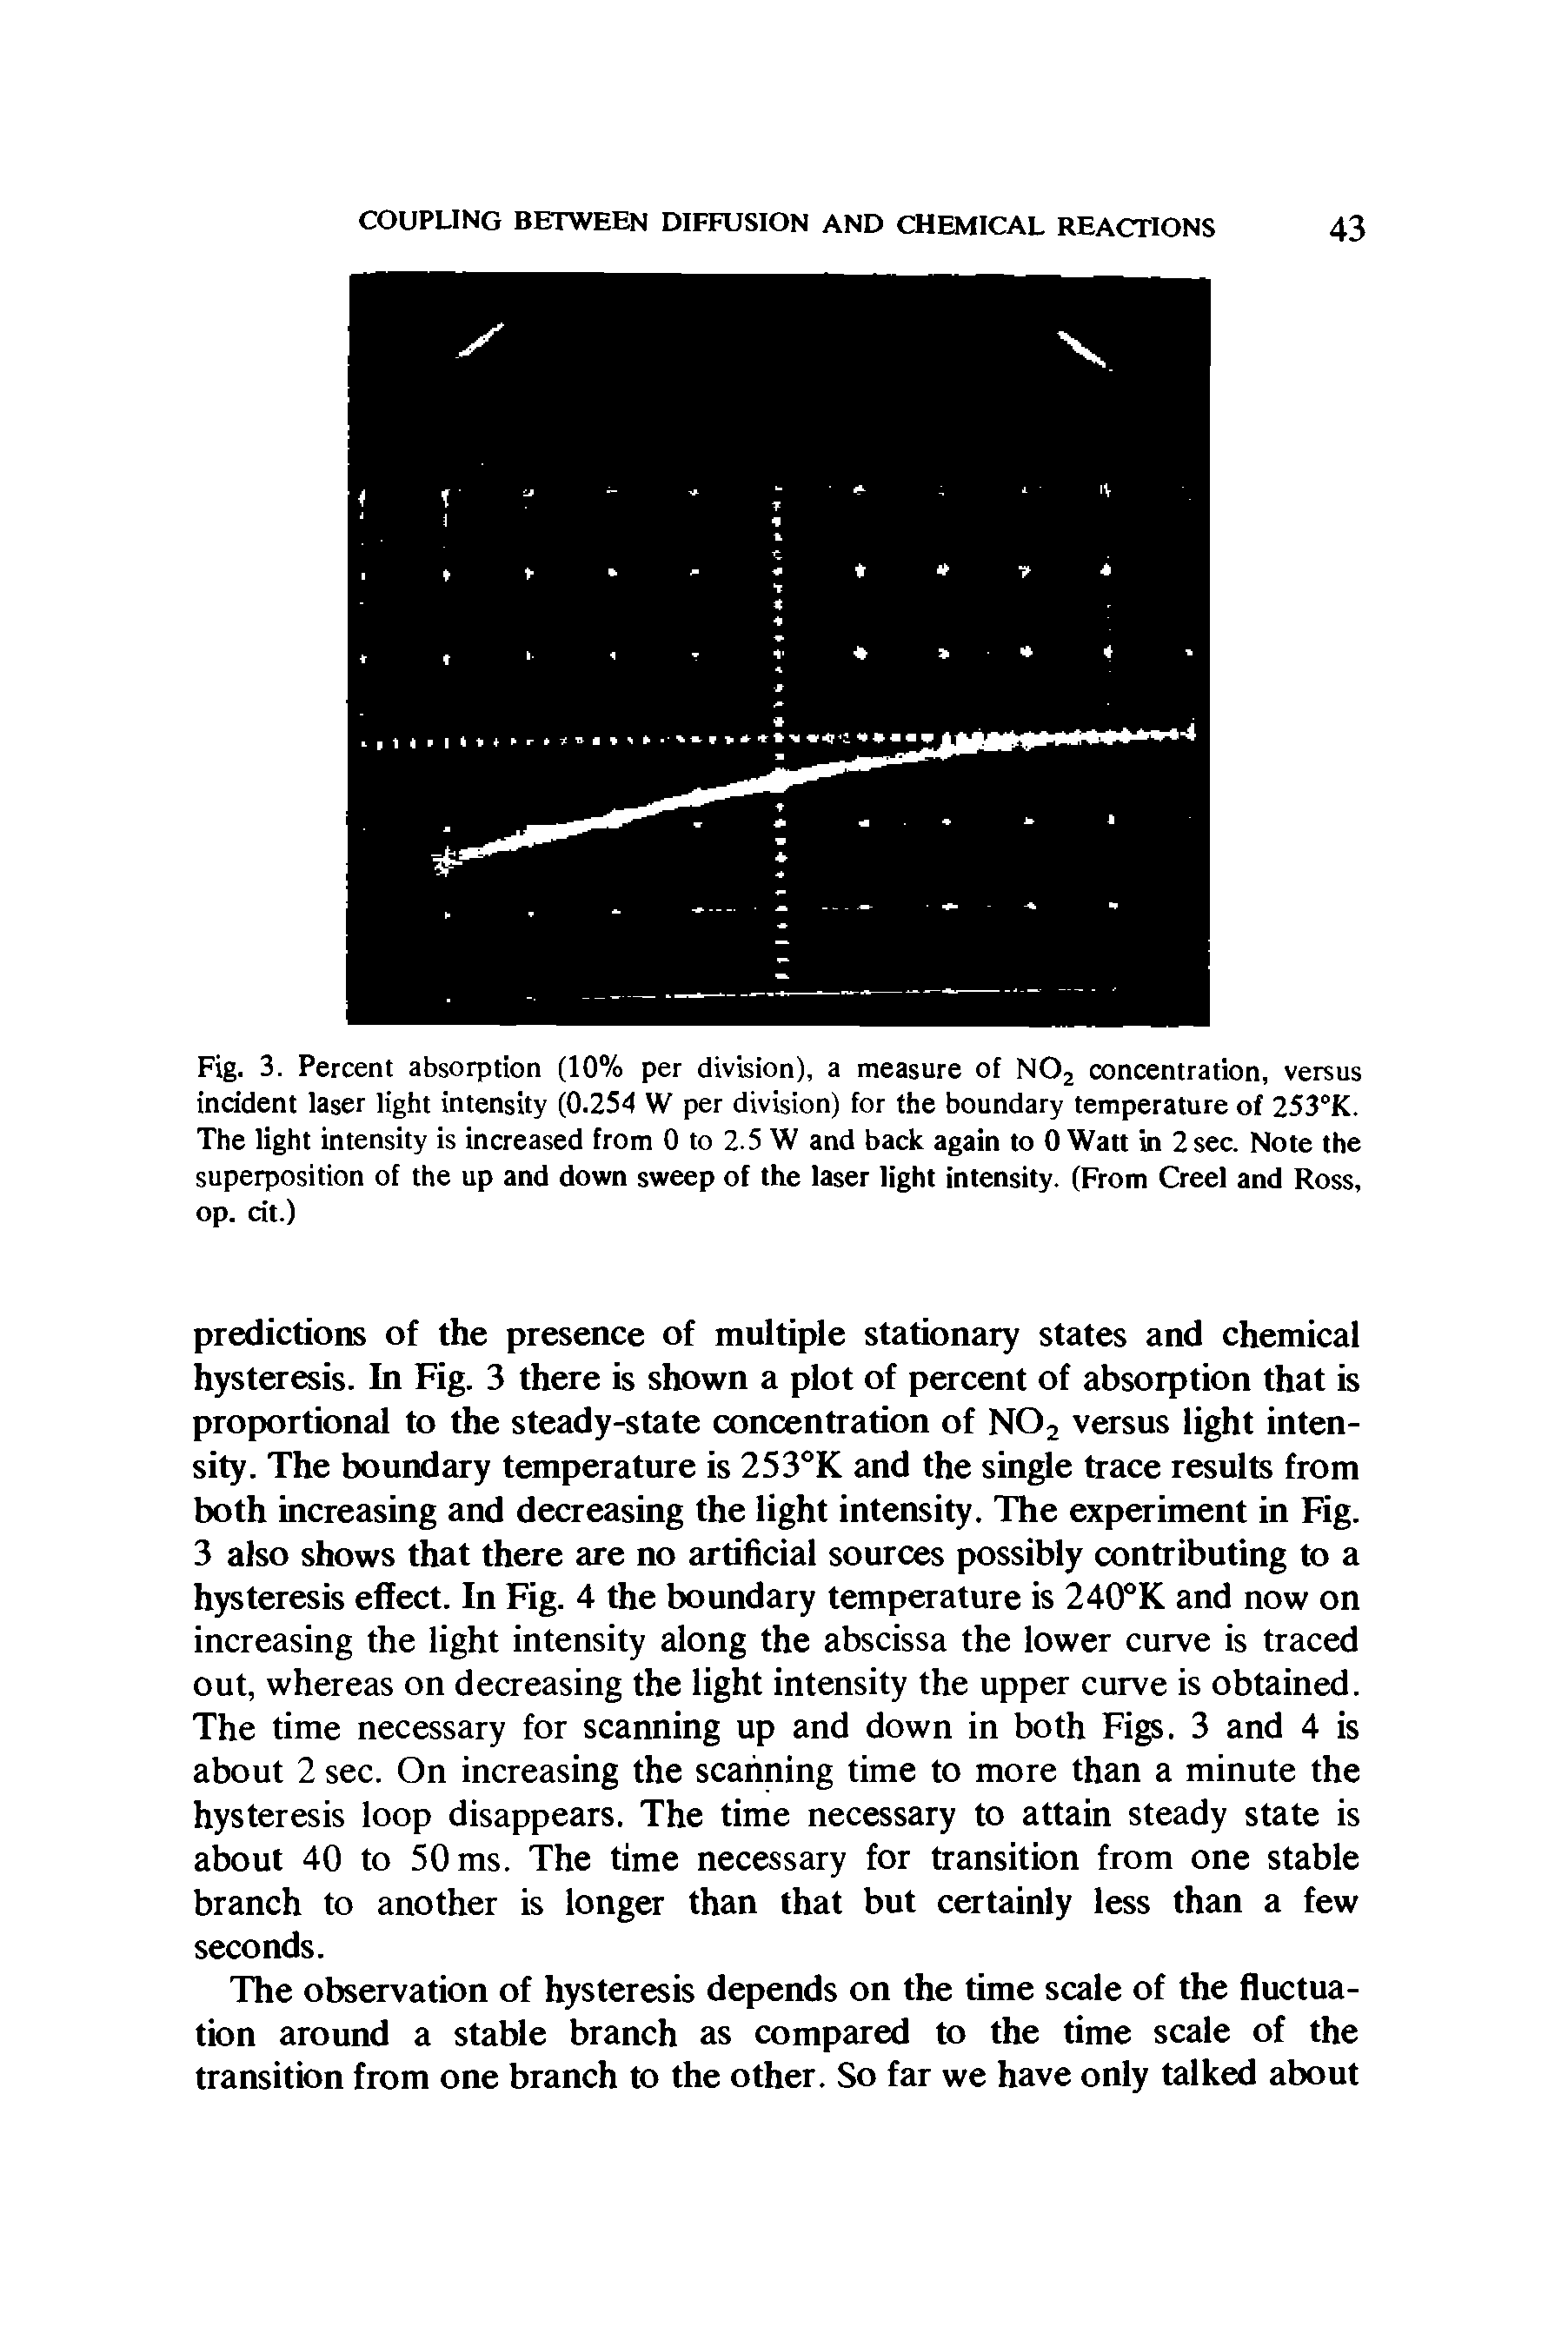 Fig. 3. Percent absorption (10% per division), a measure of NOz concentration, versus incident laser light intensity (0.254 W per division) for the boundary temperature of 253°K. The light intensity is increased from 0 to 2.5 W and back again to 0 Watt in 2 sec. Note the superposition of the up and down sweep of the laser light intensity. (From Creel and Ross, op. cit.)...